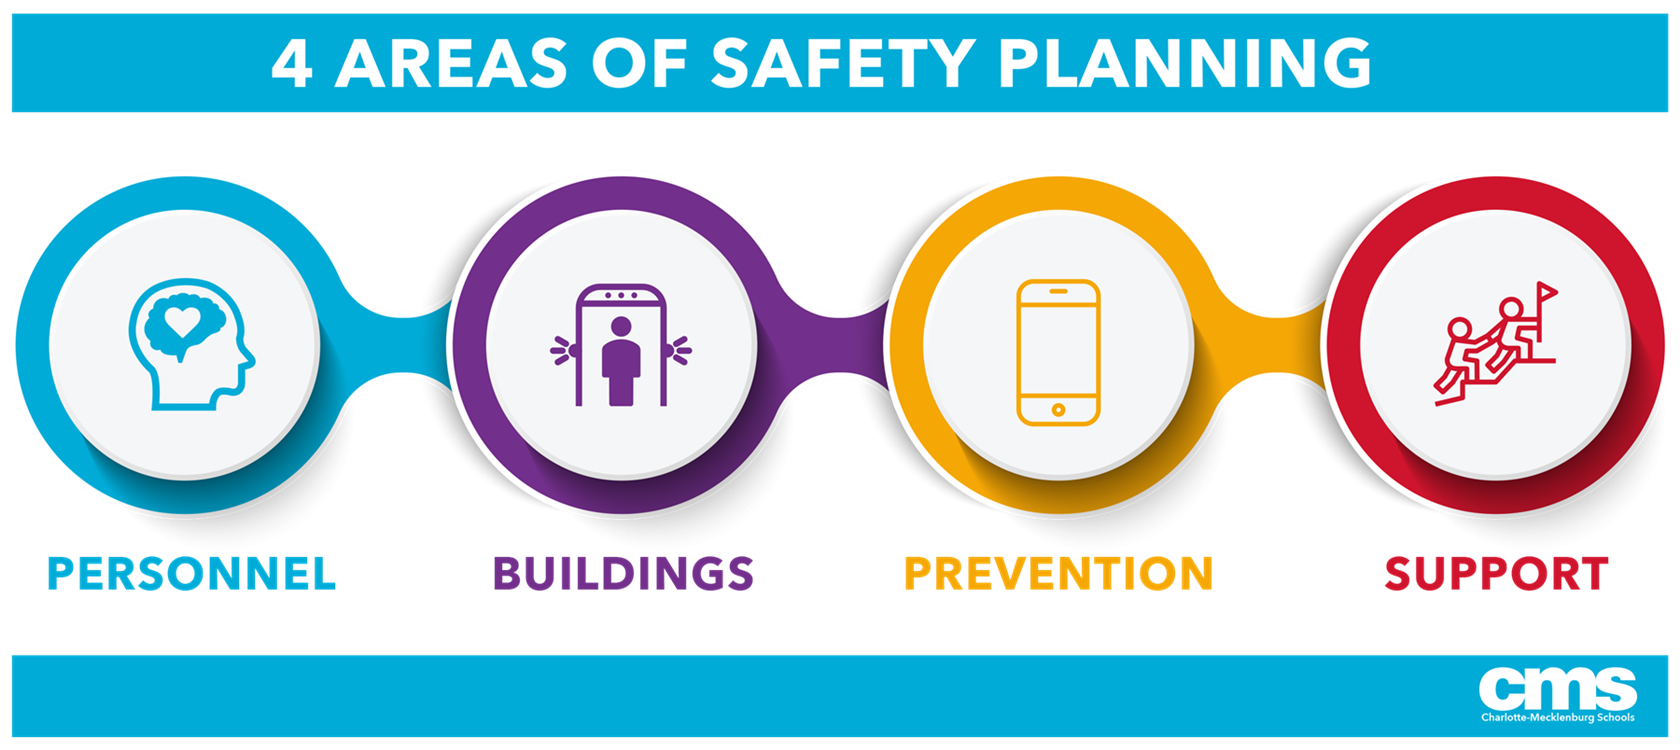 4 Areas of Safety Planning